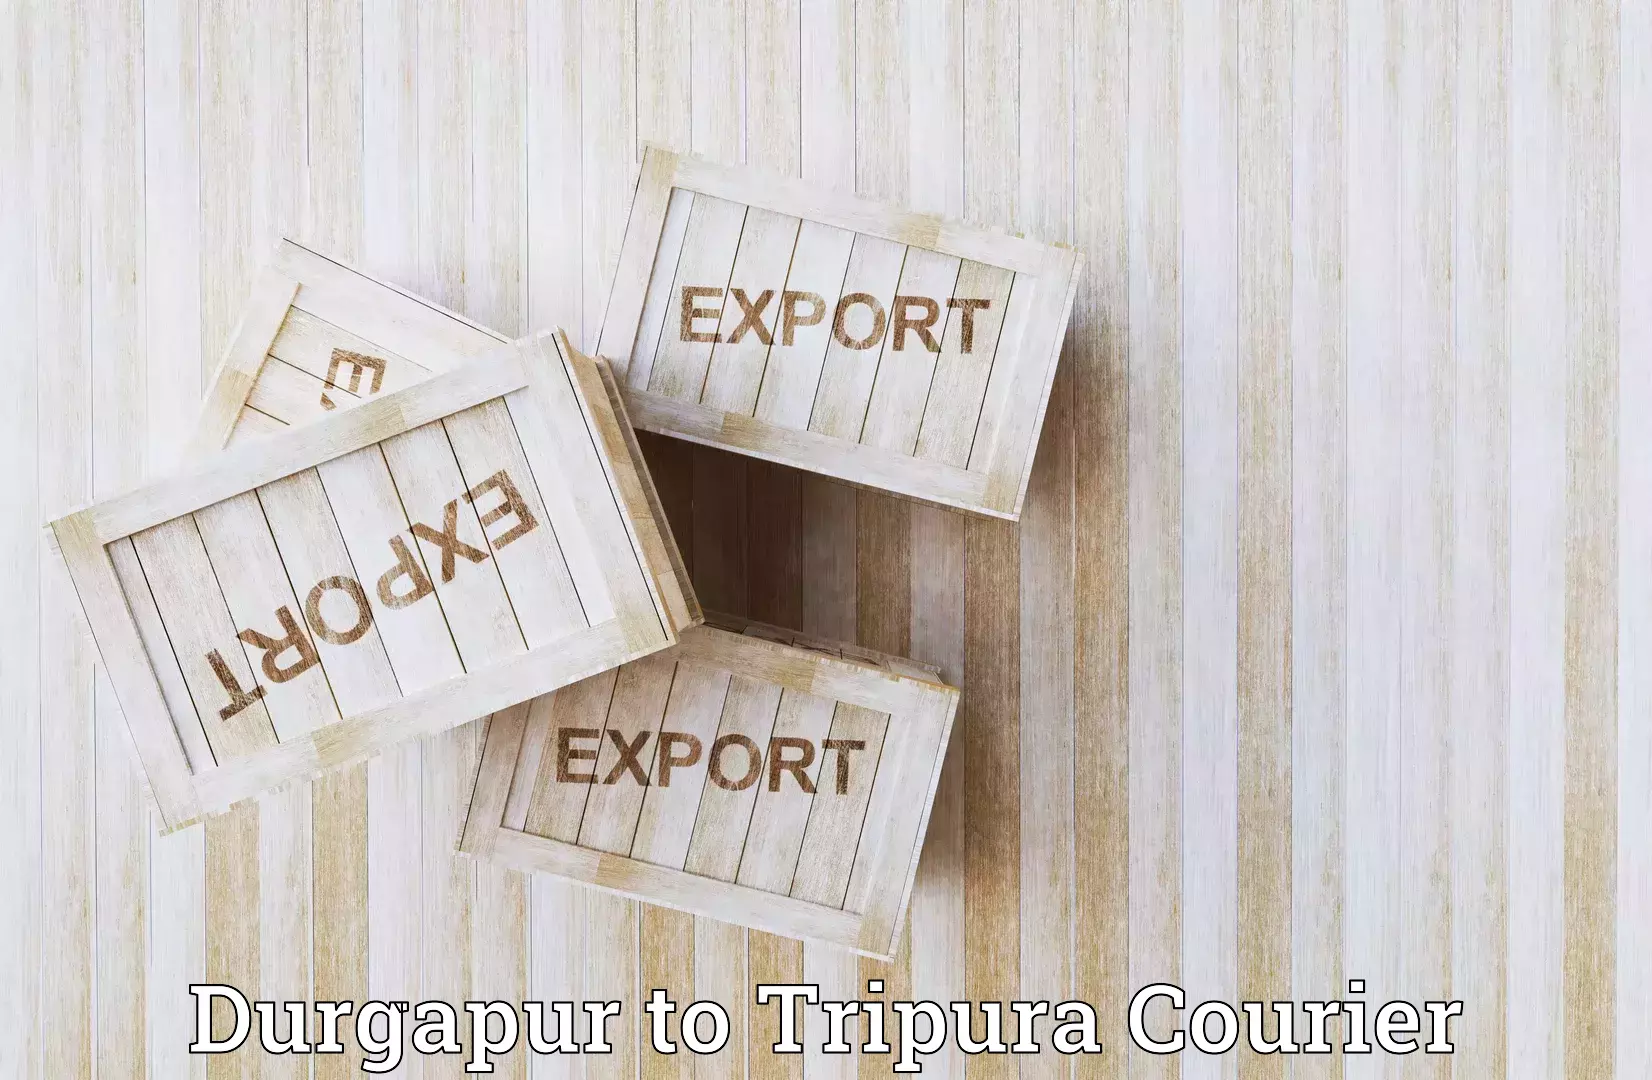 State-of-the-art courier technology Durgapur to Amarpur